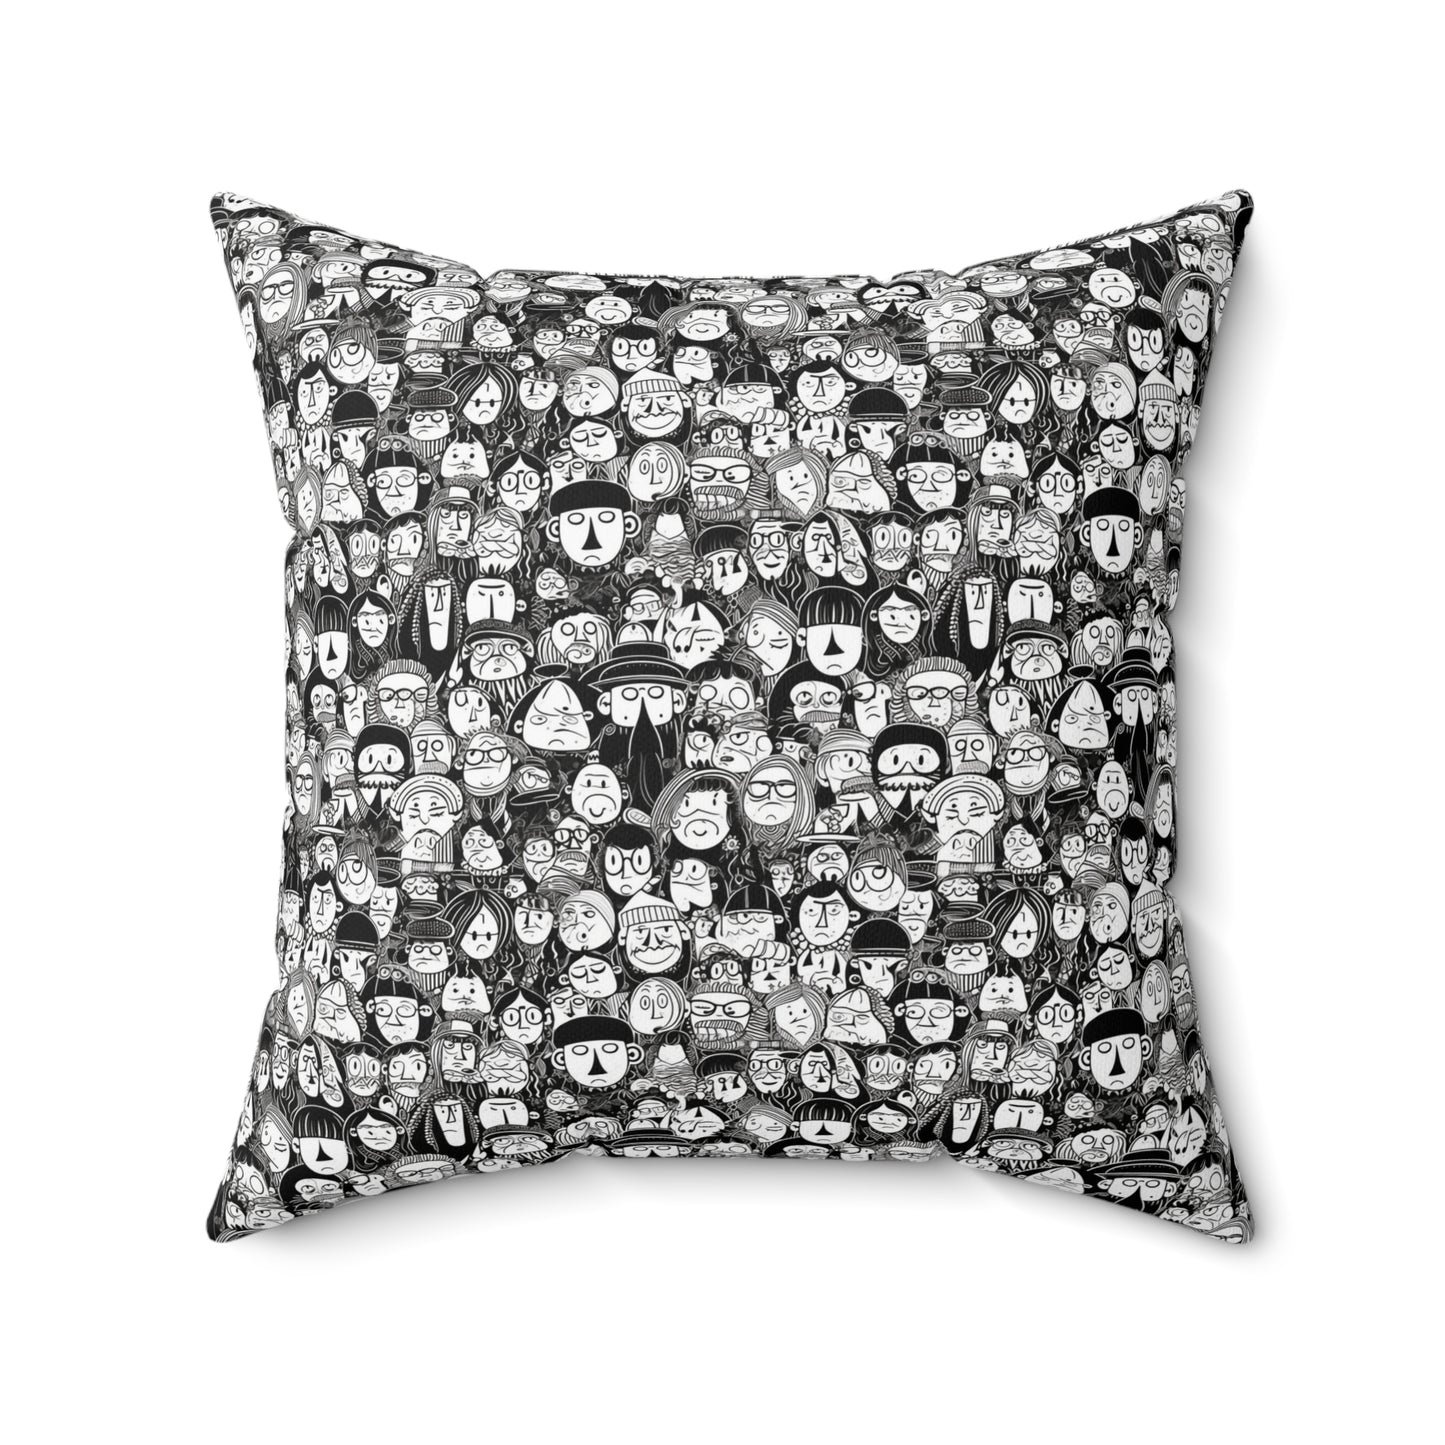 Part of the Crowd Accent Throw Pillow